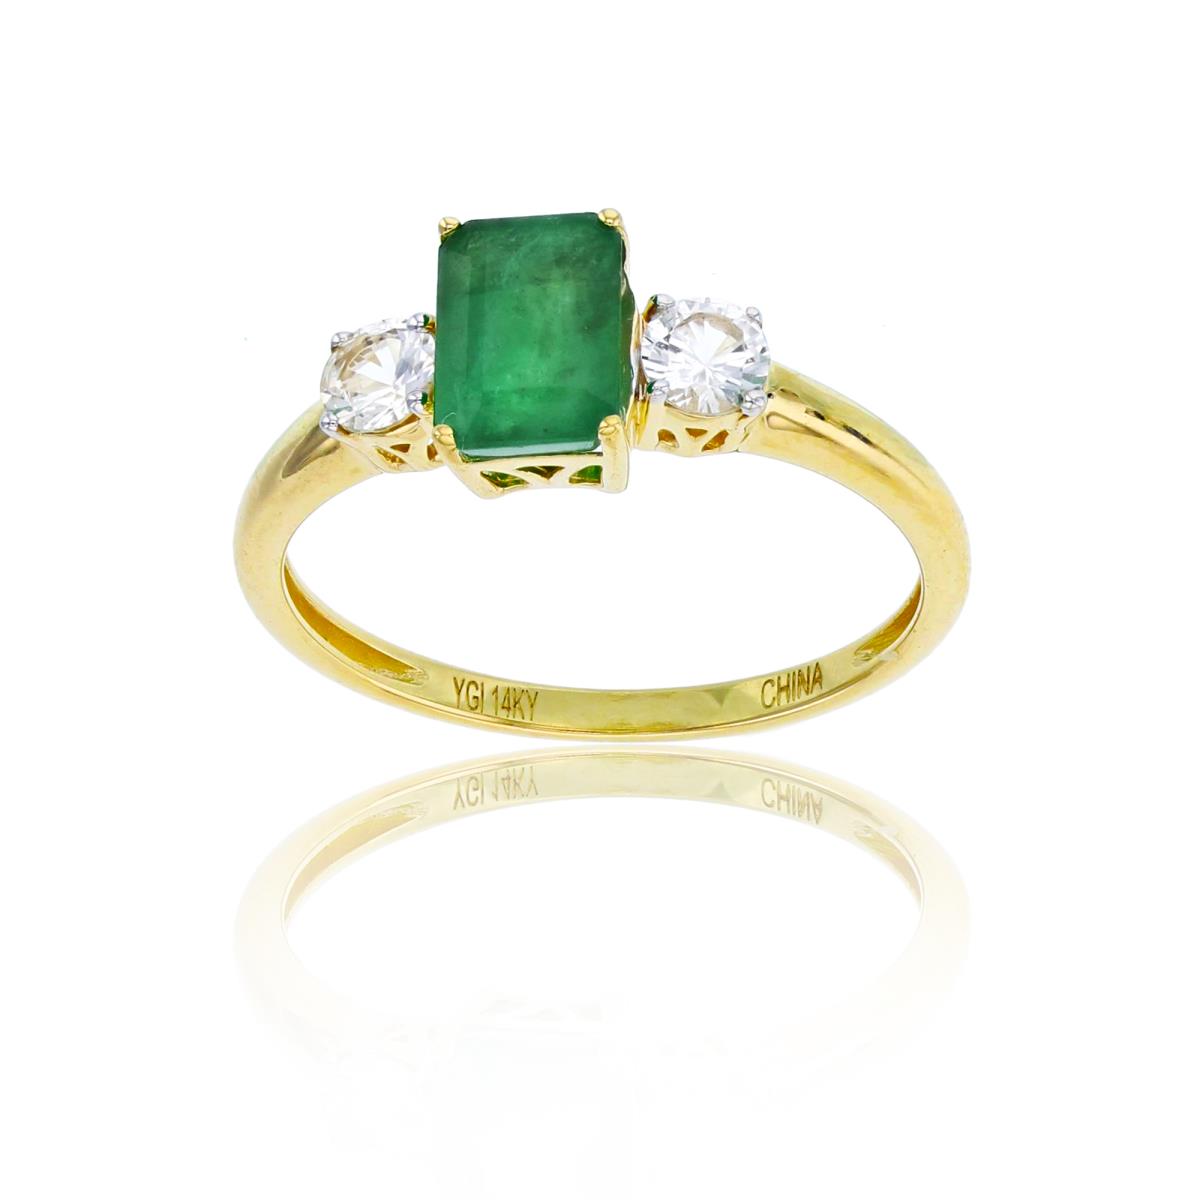 10K Yellow Gold 7x5mm Oct Emerald & 3.5mm Rnd White Topaz on Sides Ring